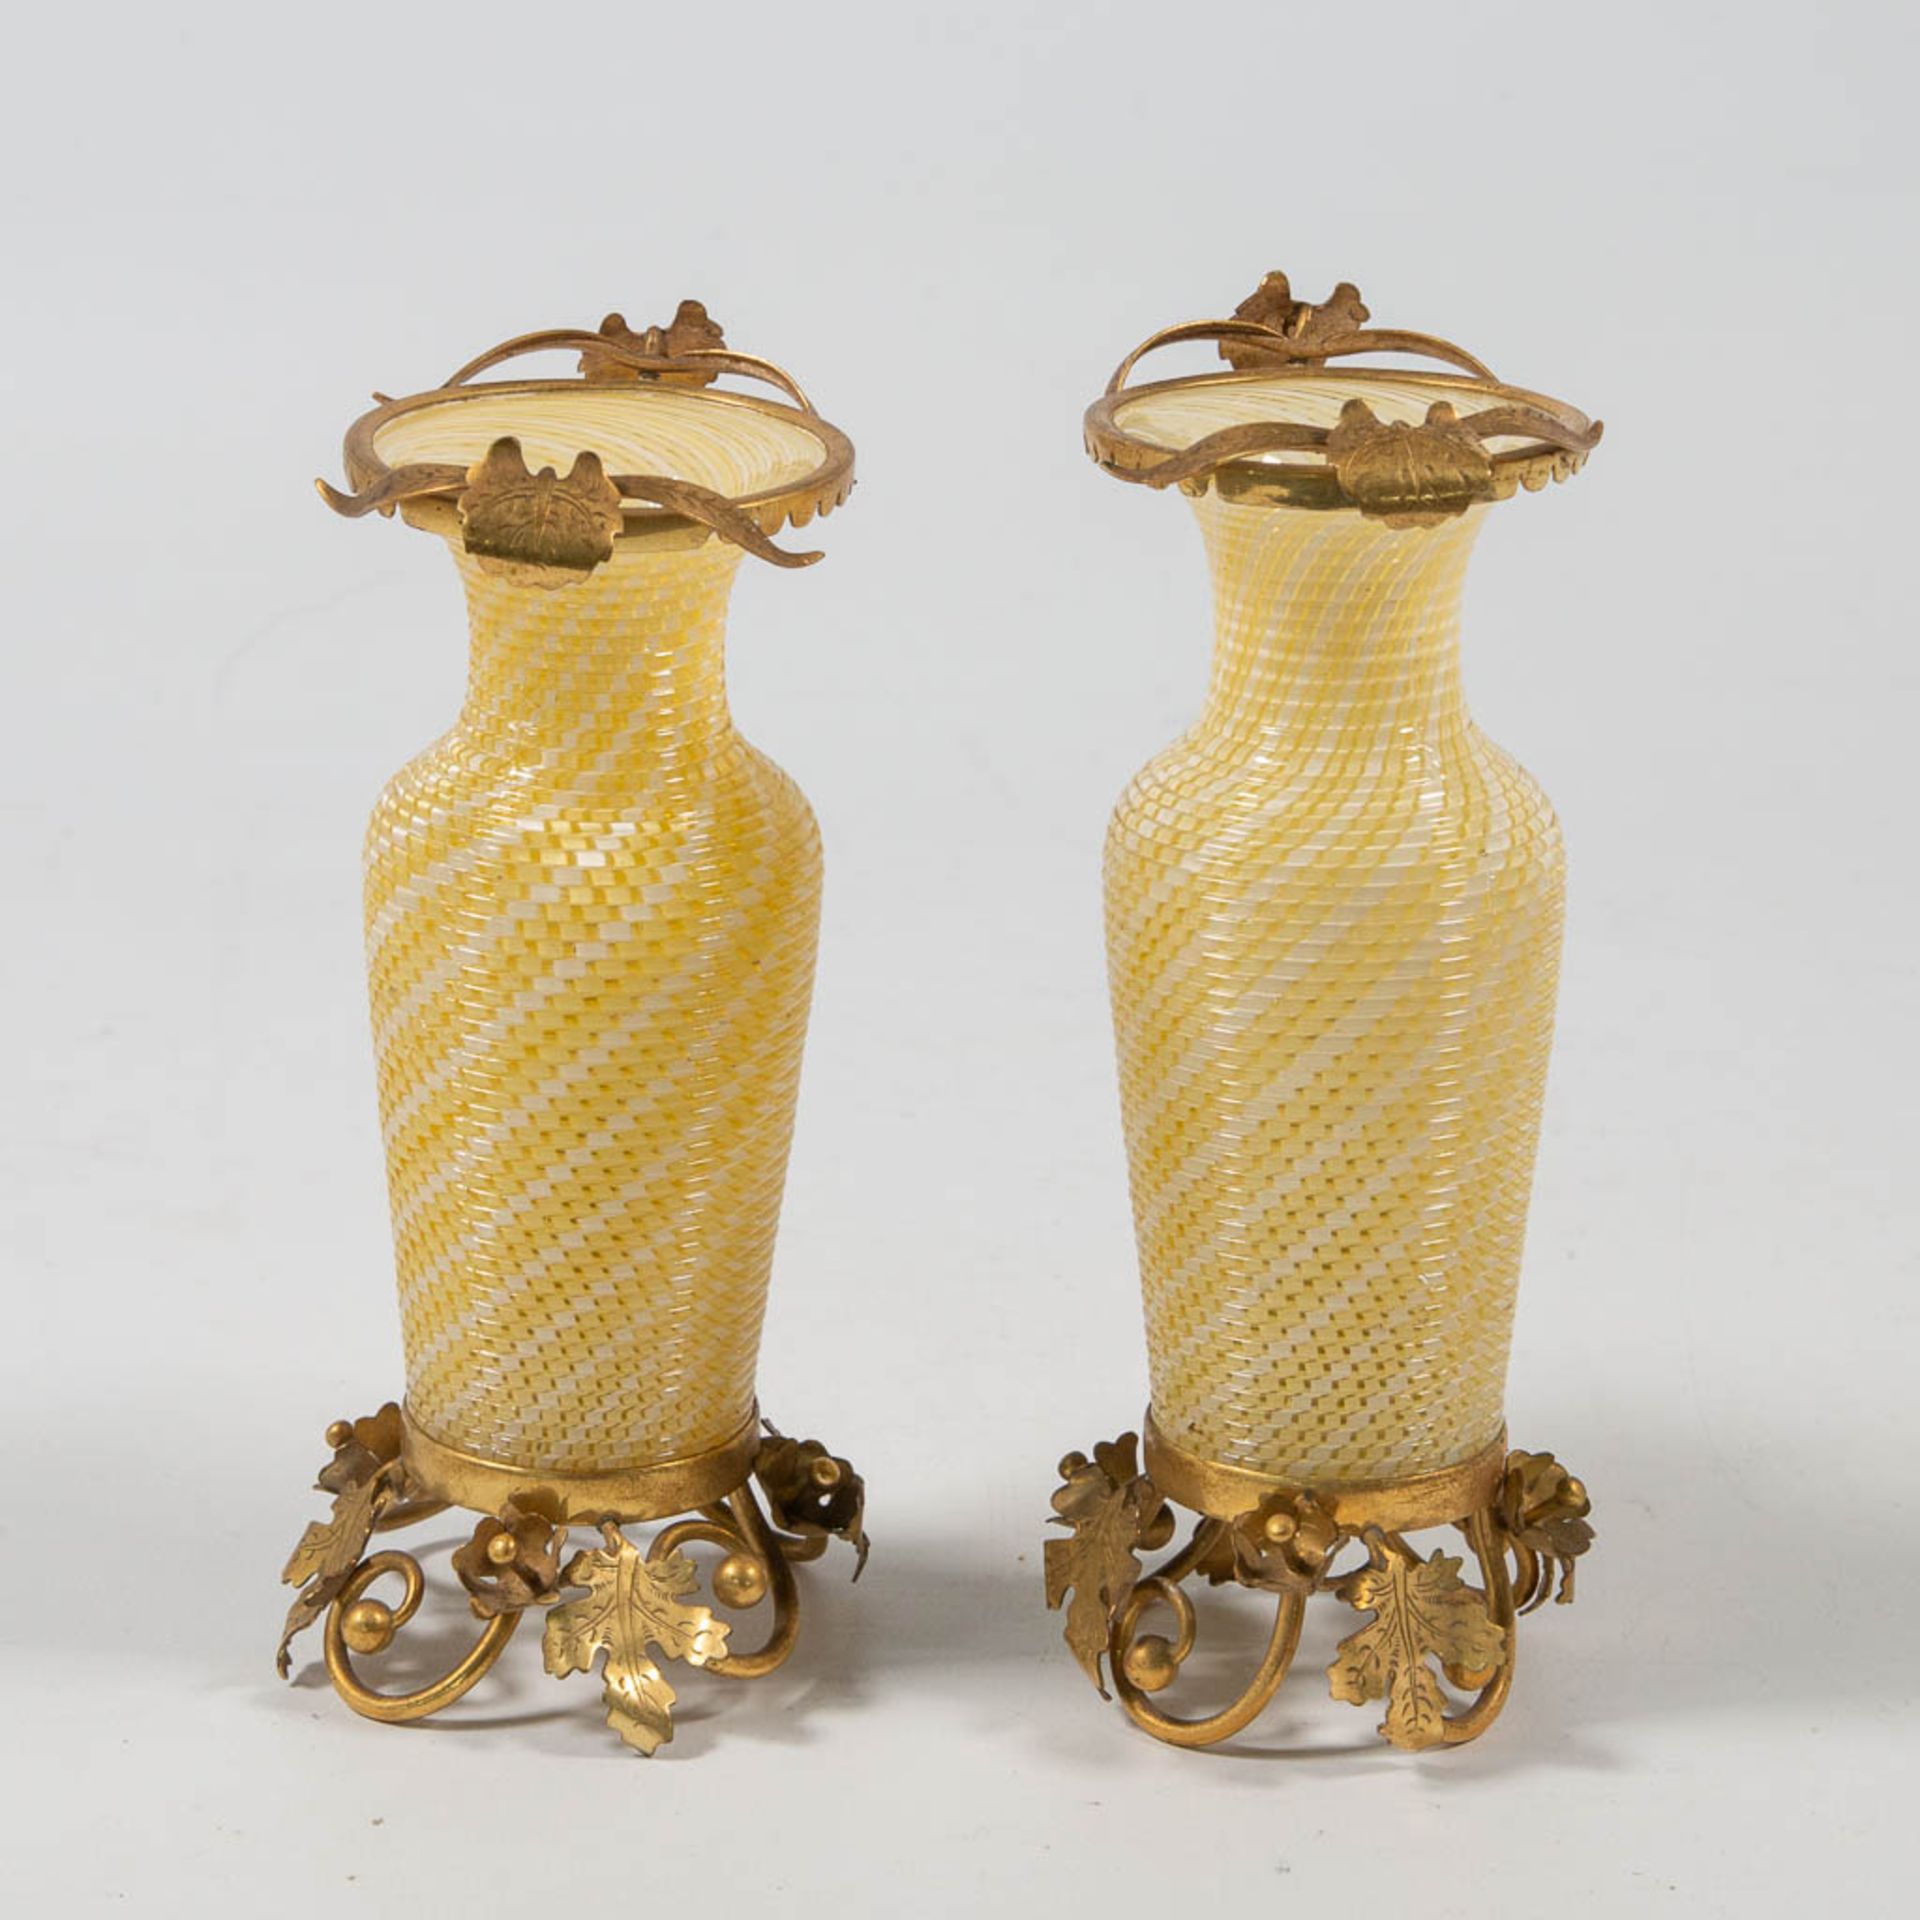 A pair of vases made of glass and mounted with bronze, made in Murano, Italy around 1900. (16 x 6,5 - Image 2 of 13